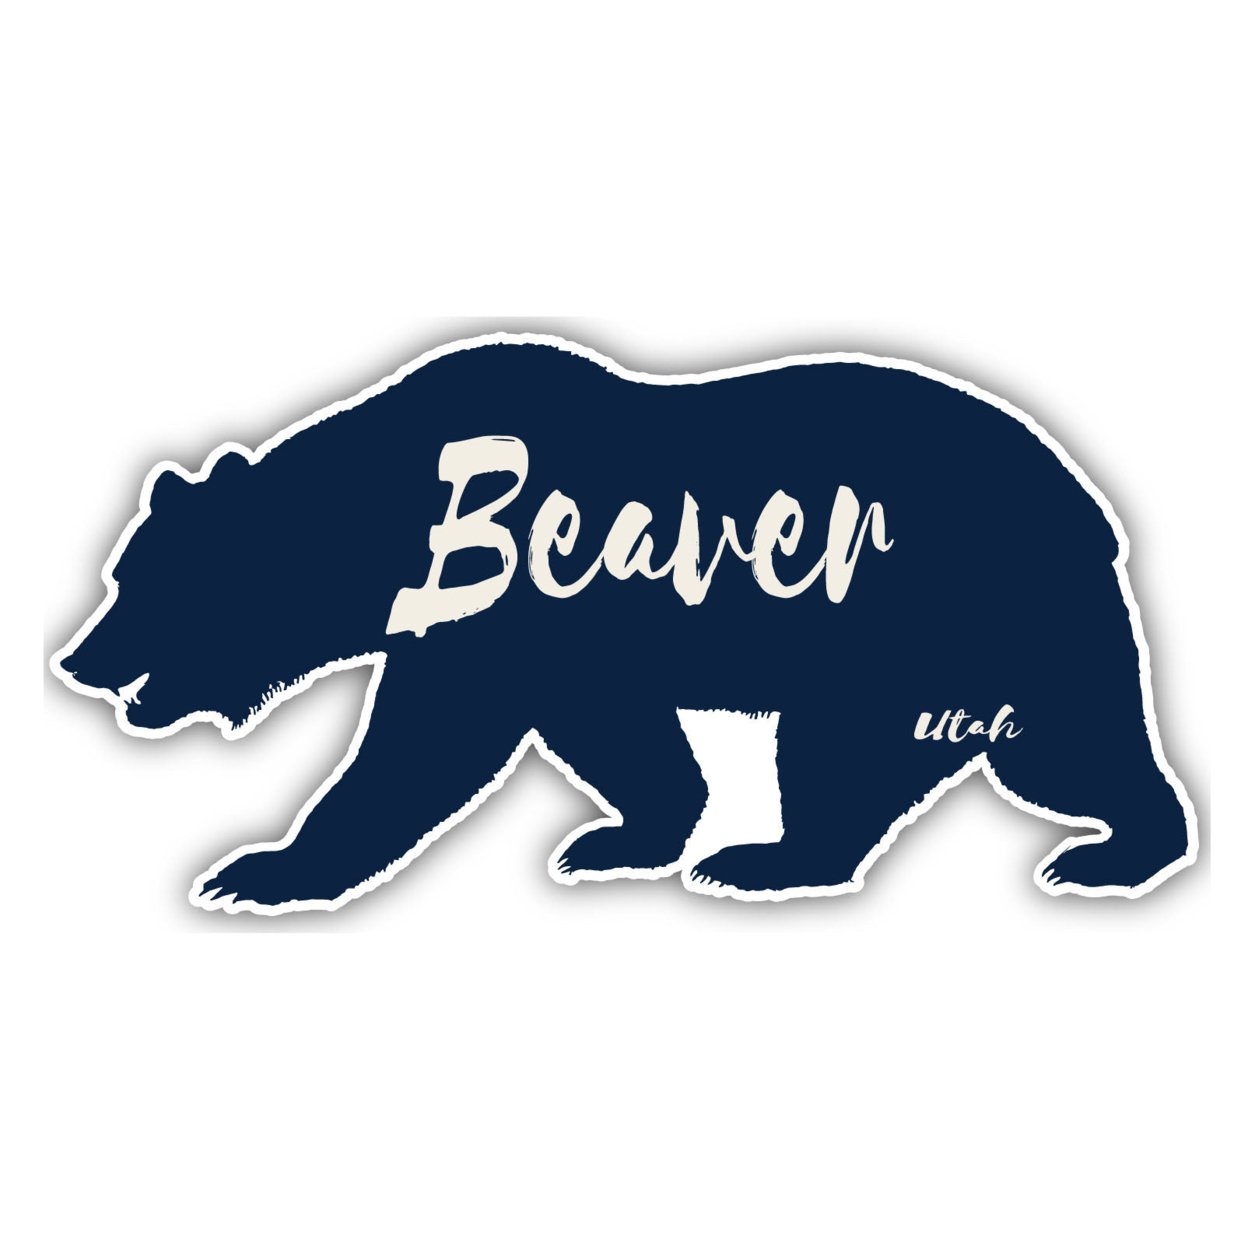 Beaver Utah Souvenir Decorative Stickers (Choose Theme And Size) - 4-Pack, 4-Inch, Tent